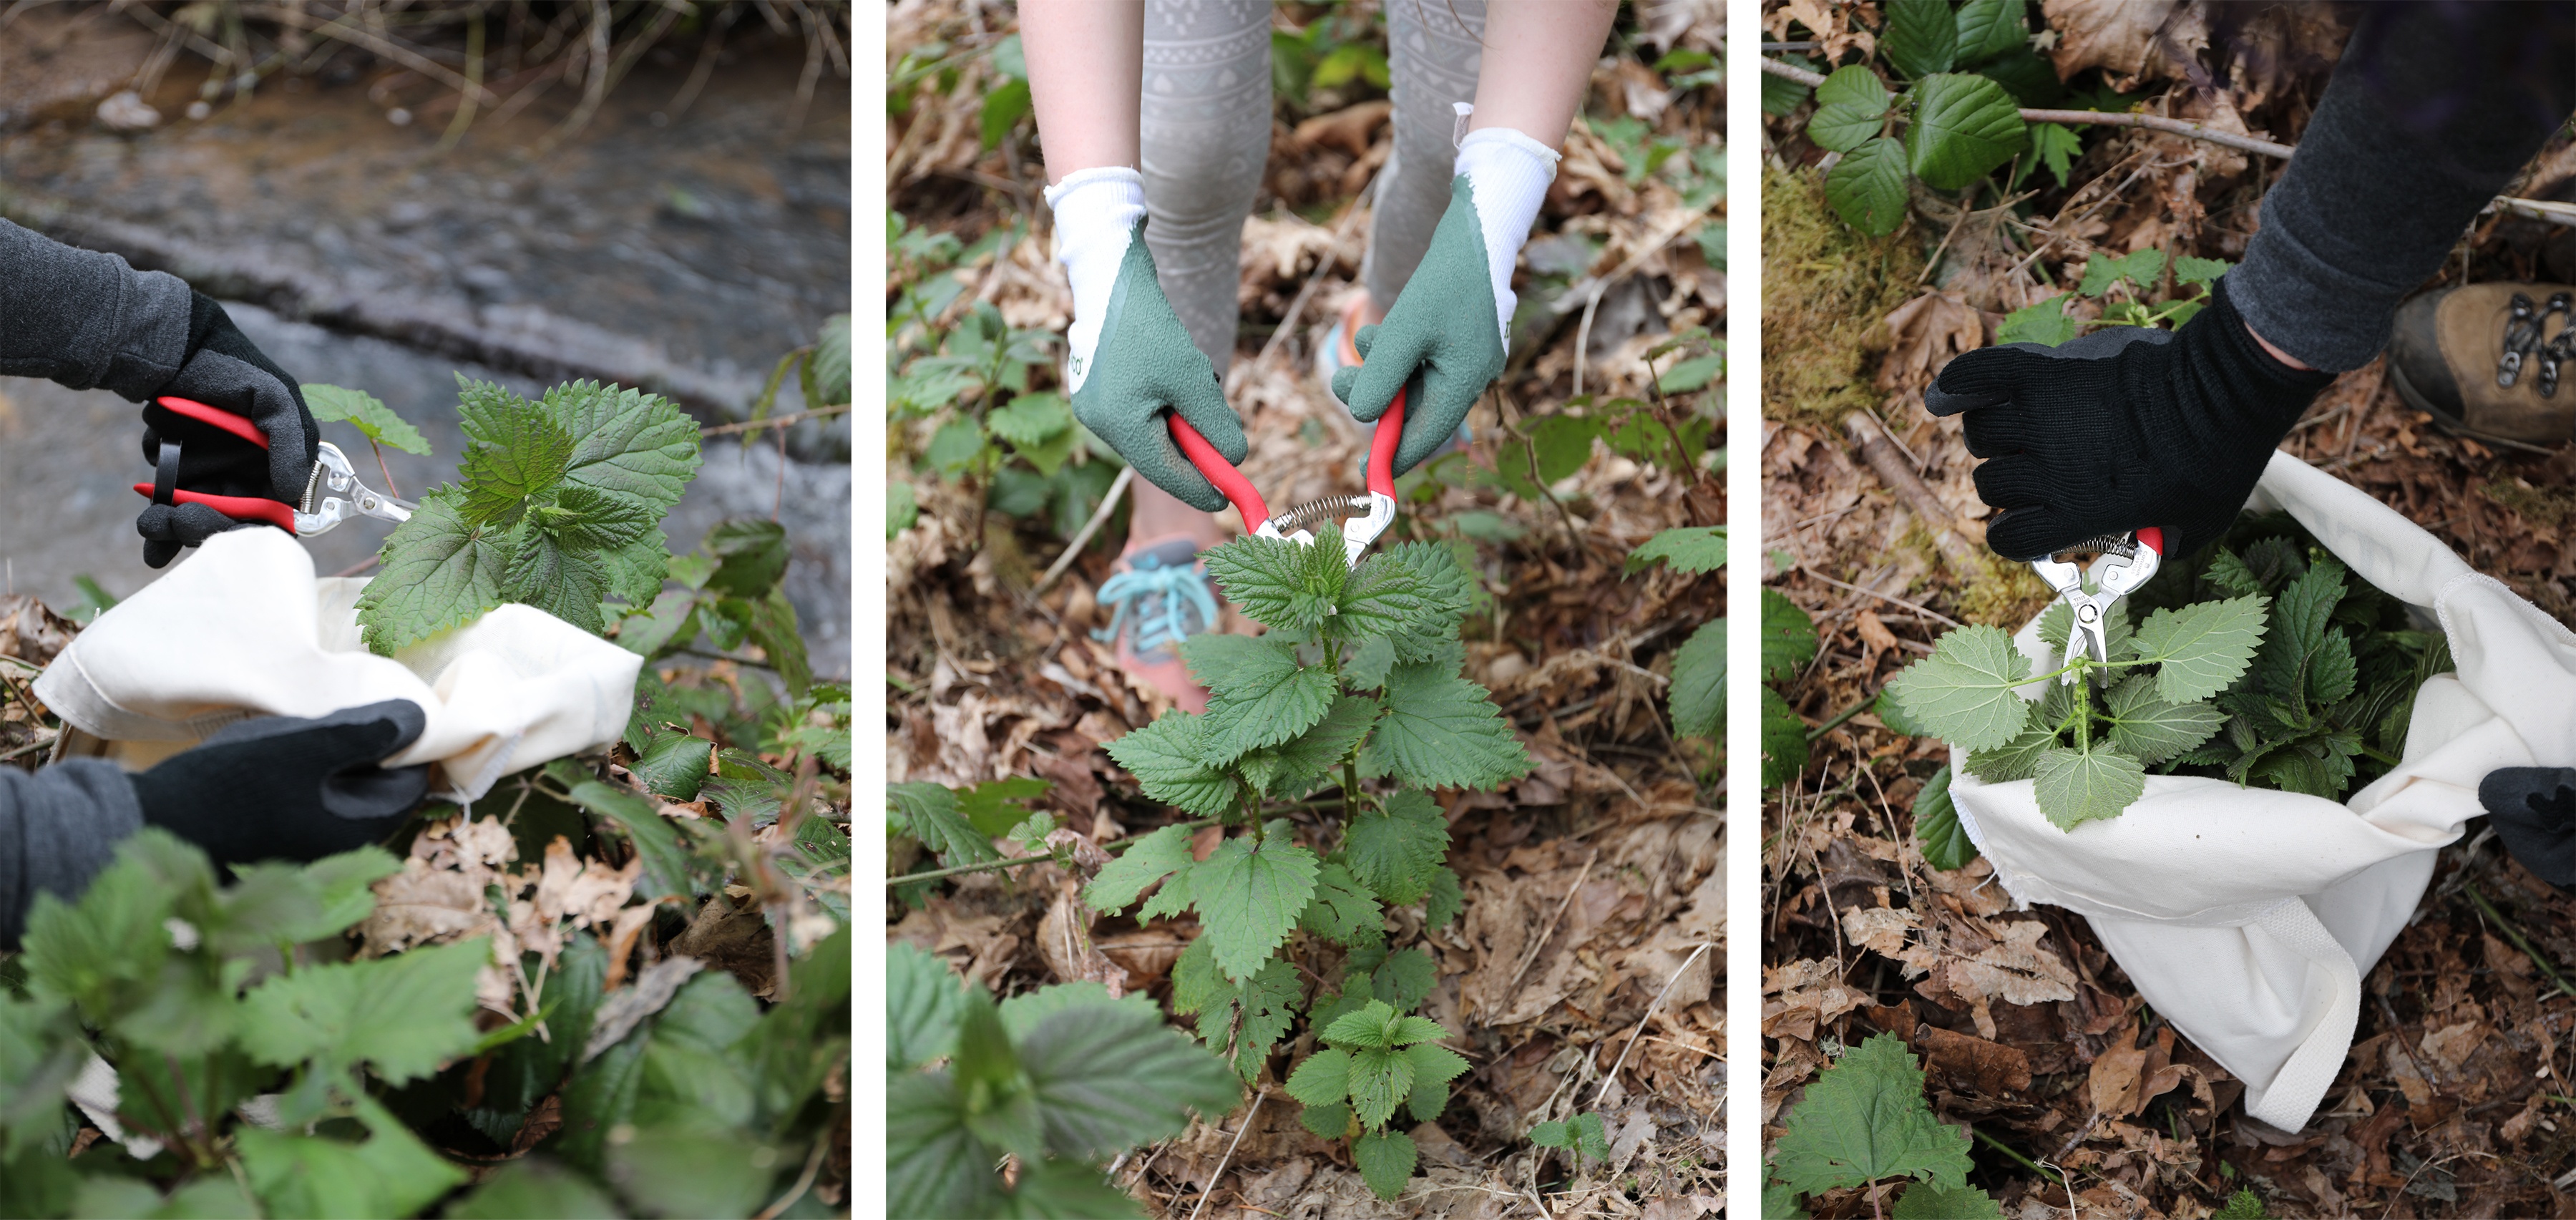 Three images of people wearing gloves harvesting stinging nettles in the wild with garden clippers